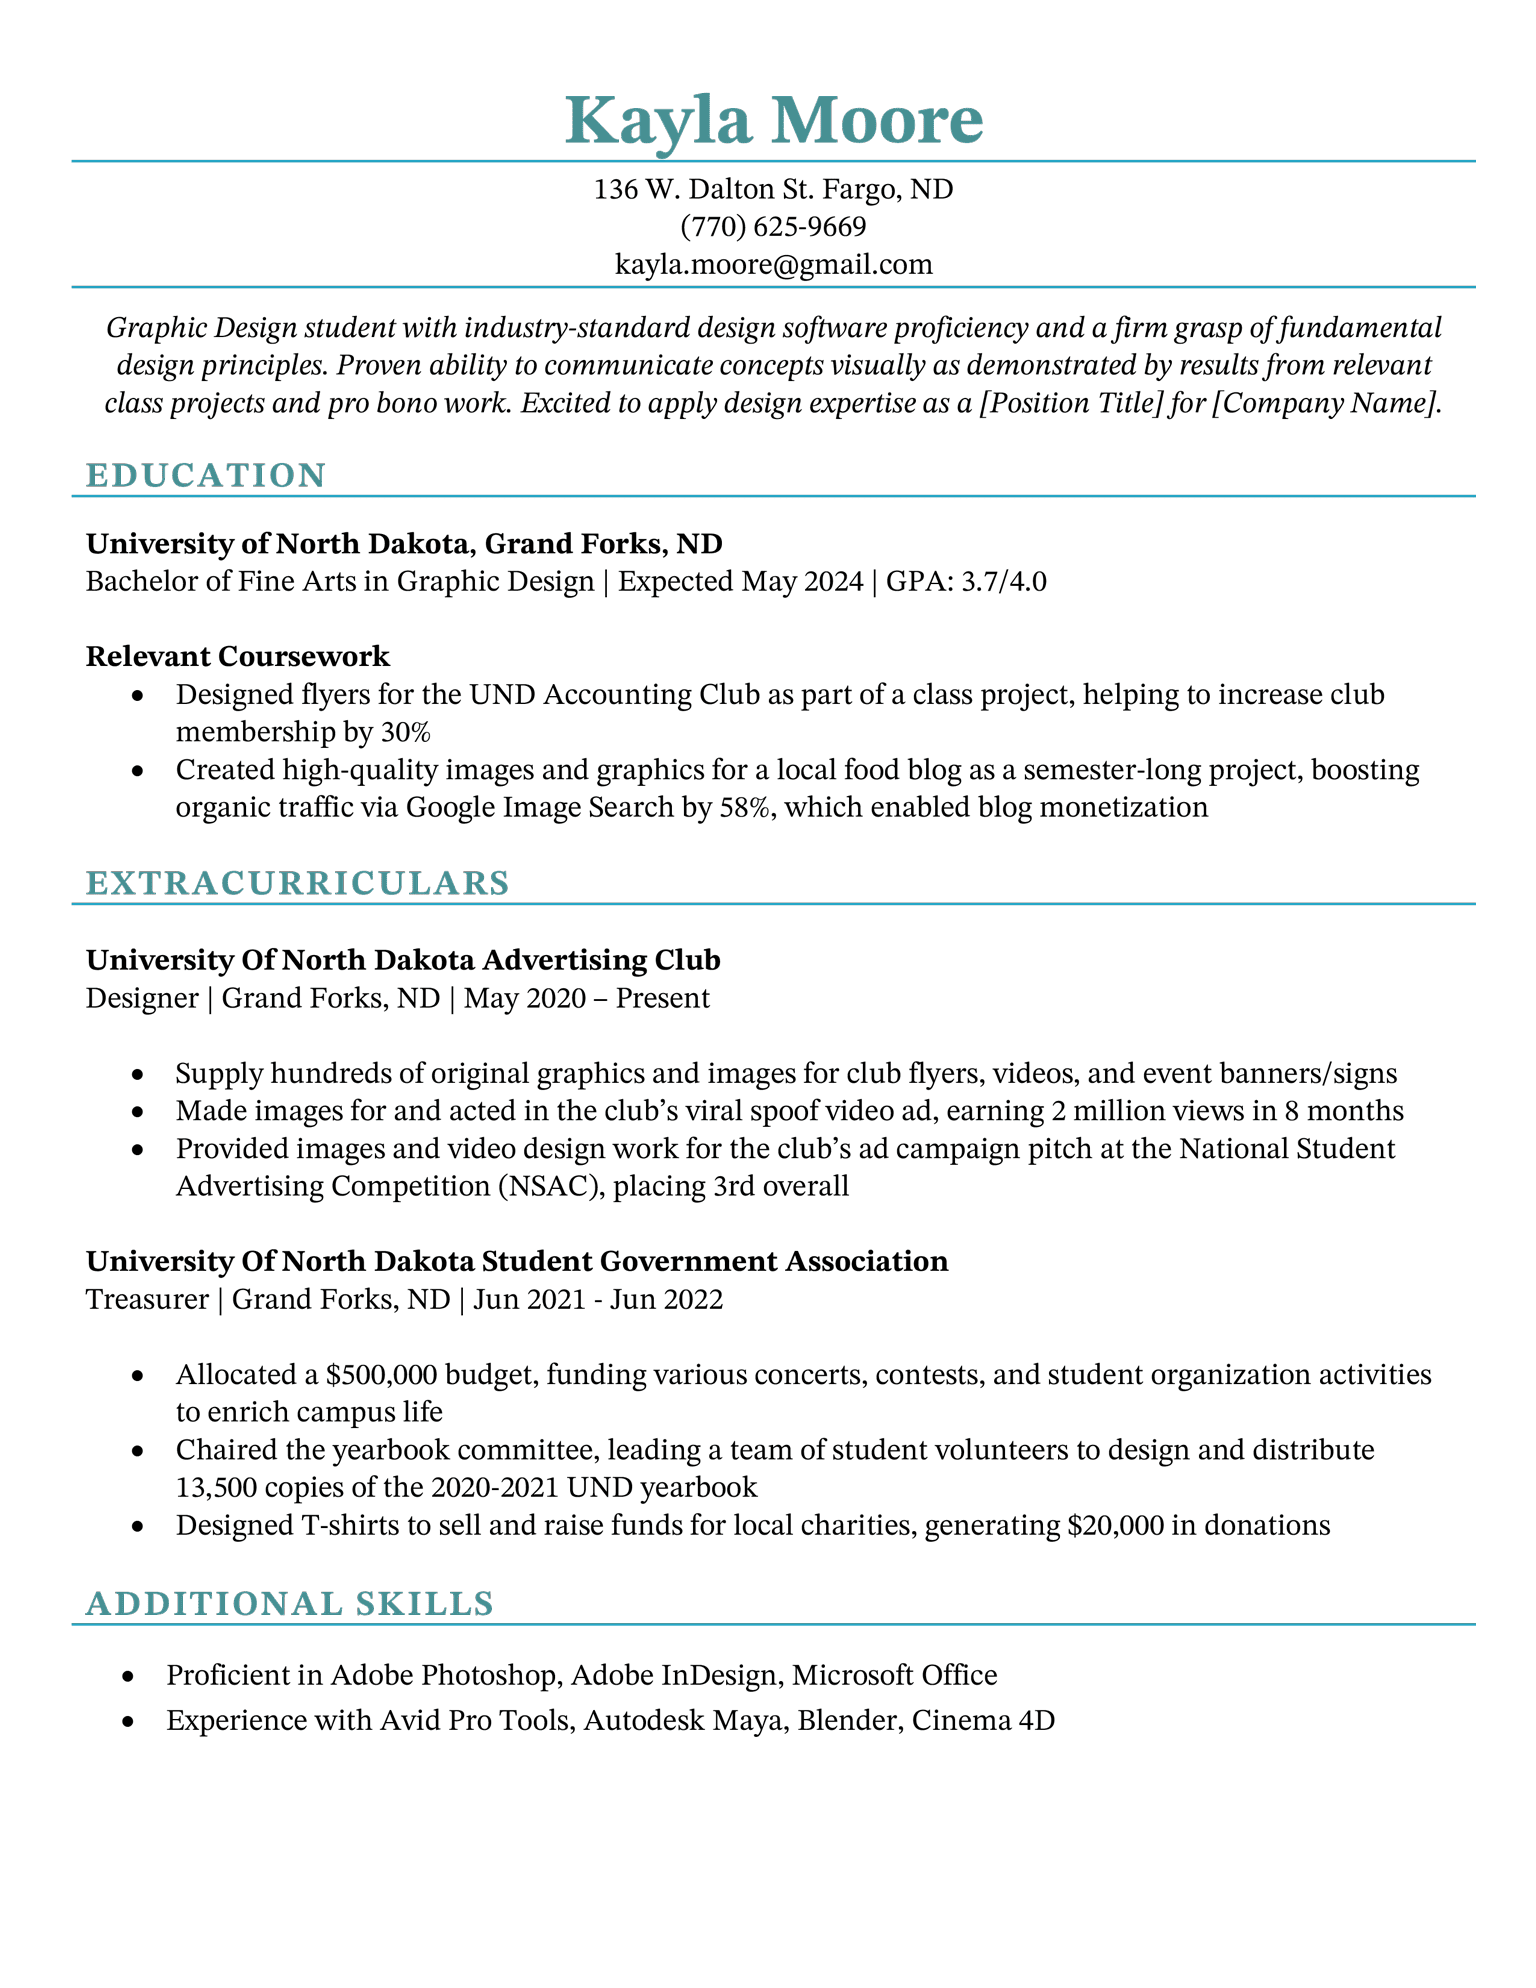 Example of an undergraduate resume using a simple resume template in teal.